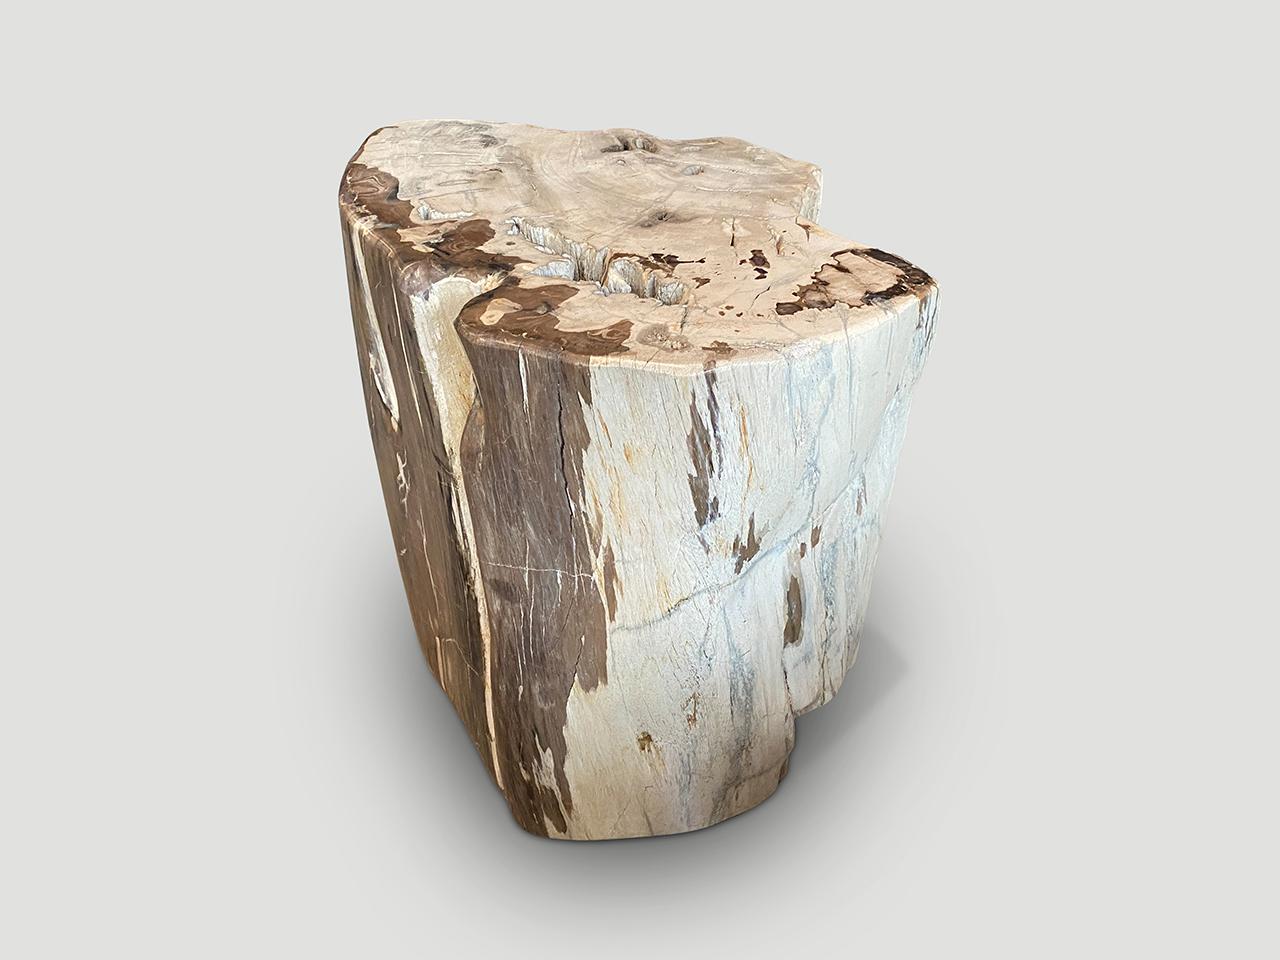 Organic Modern Andrianna Shamaris Ancient Petrified Wood Side Table or Coffee Table For Sale